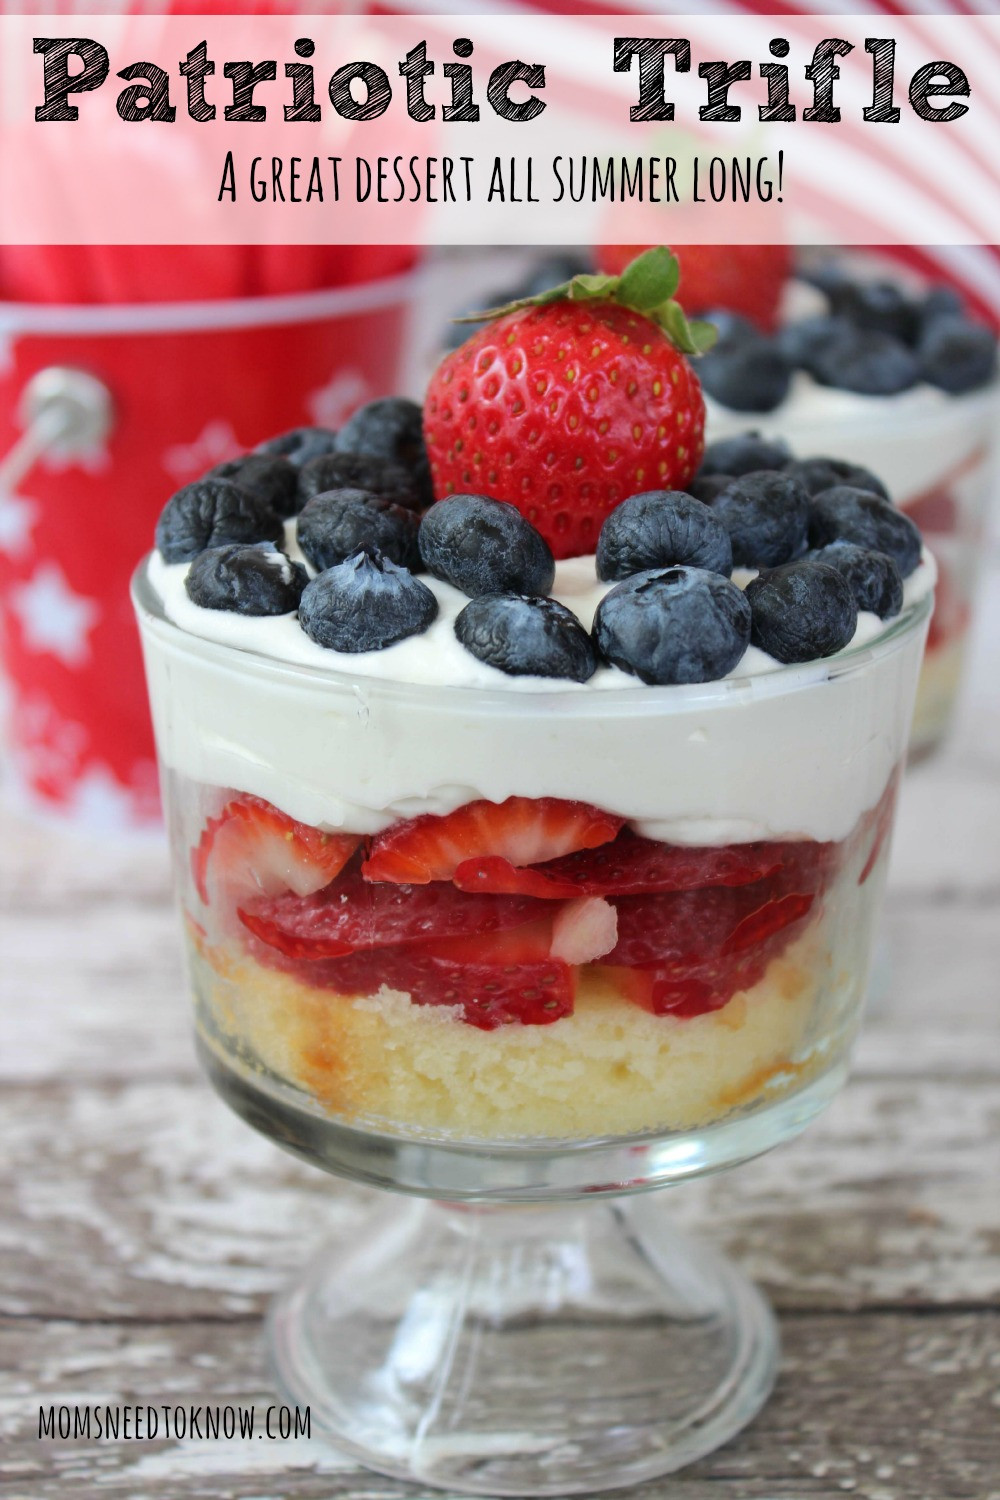 Red White And Blue Desserts
 Red White Blue Trifle for the 4th of July